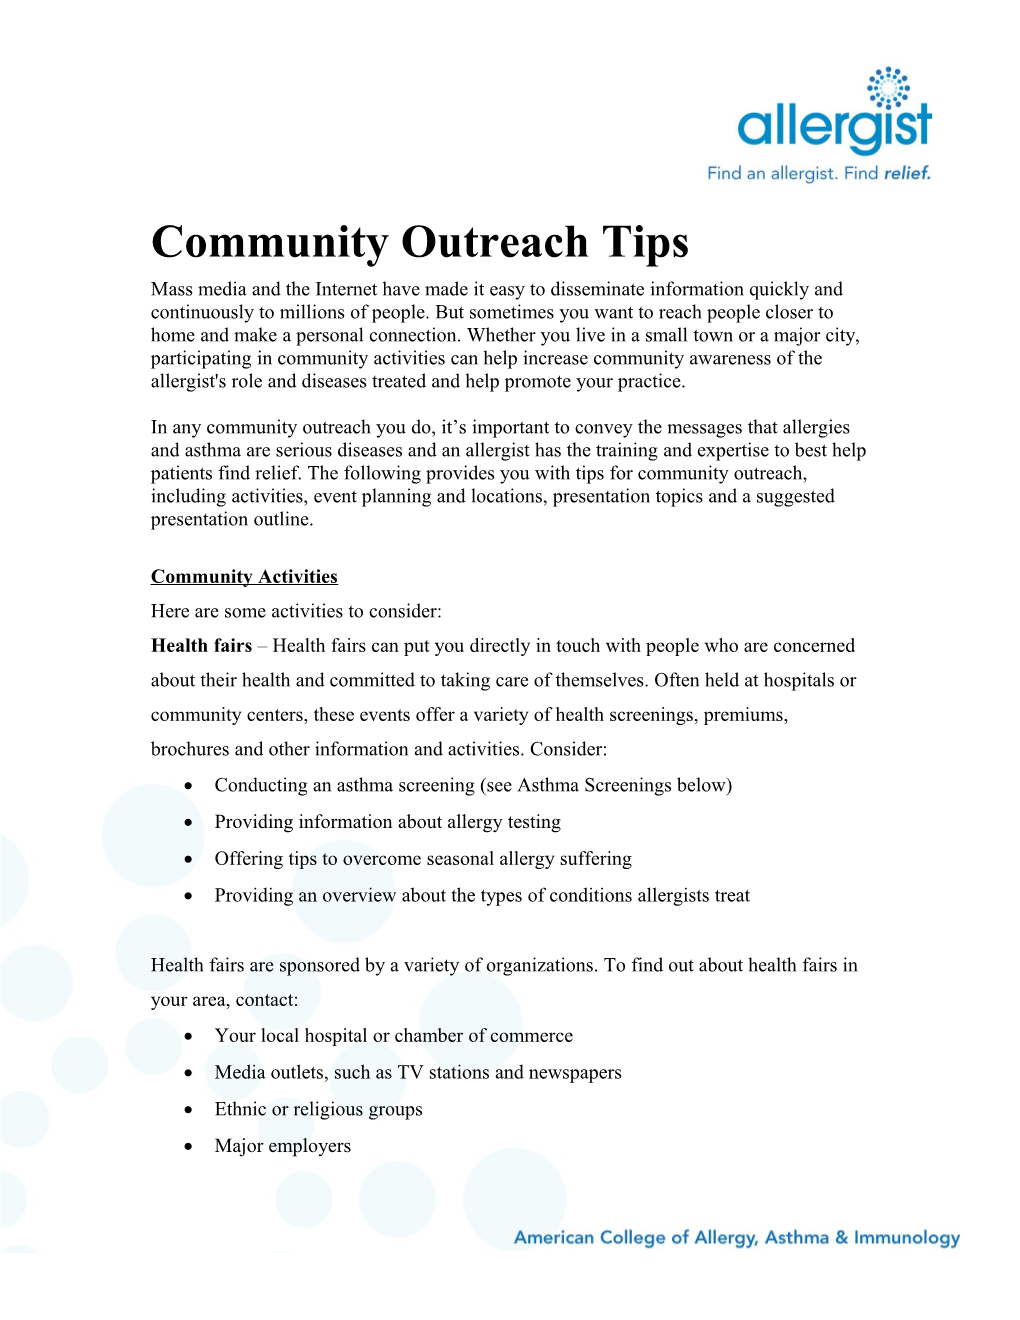 Community Outreach Tips